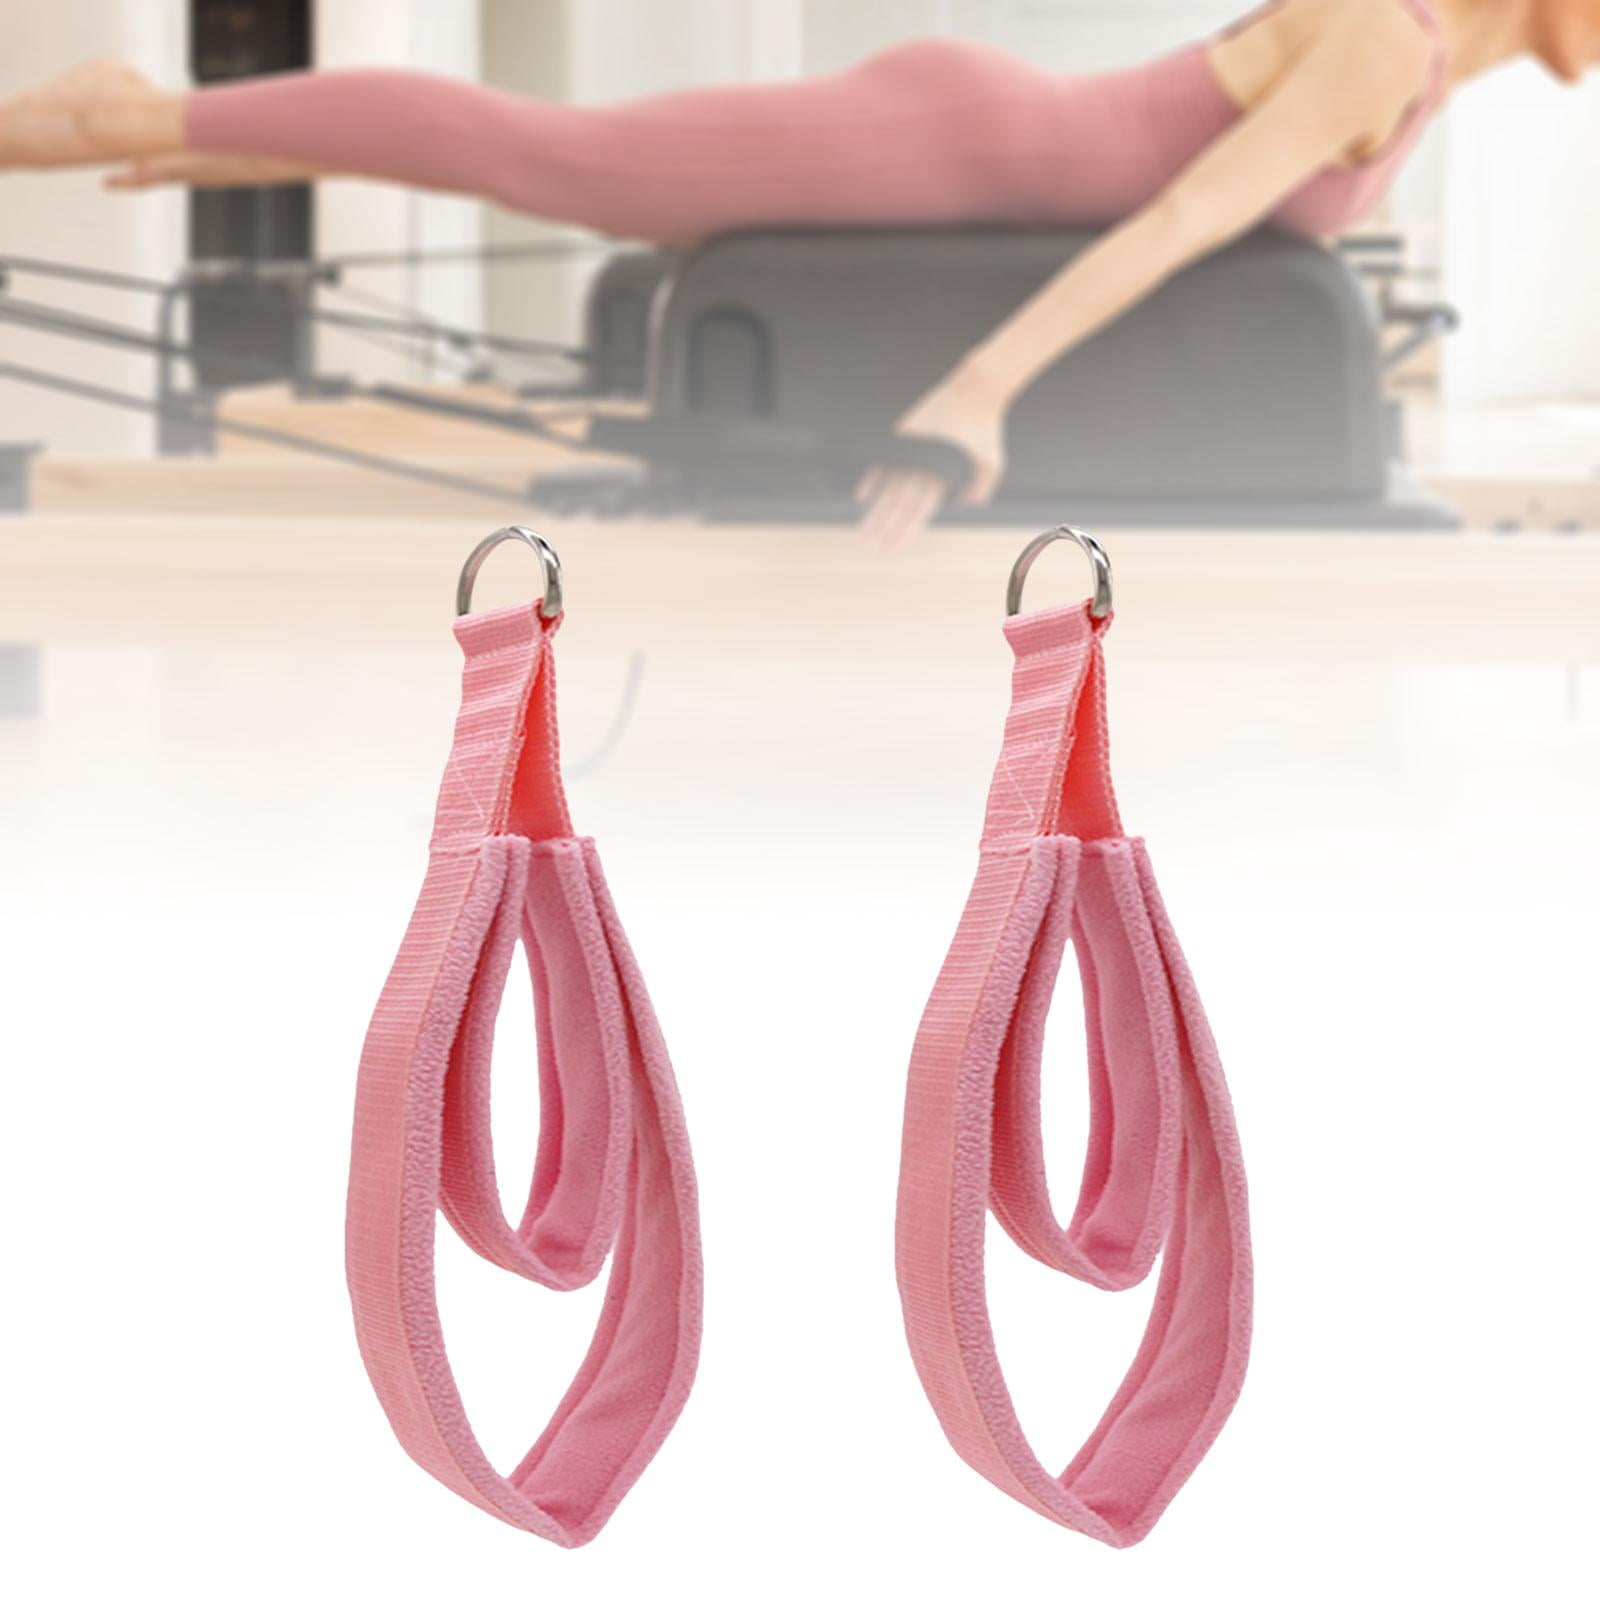  Strapilates Double Loop Fitness Pilates Straps for Reformer,  Cadillac, and Other Fitness Equipment, One Pair, Pink : Sports & Outdoors